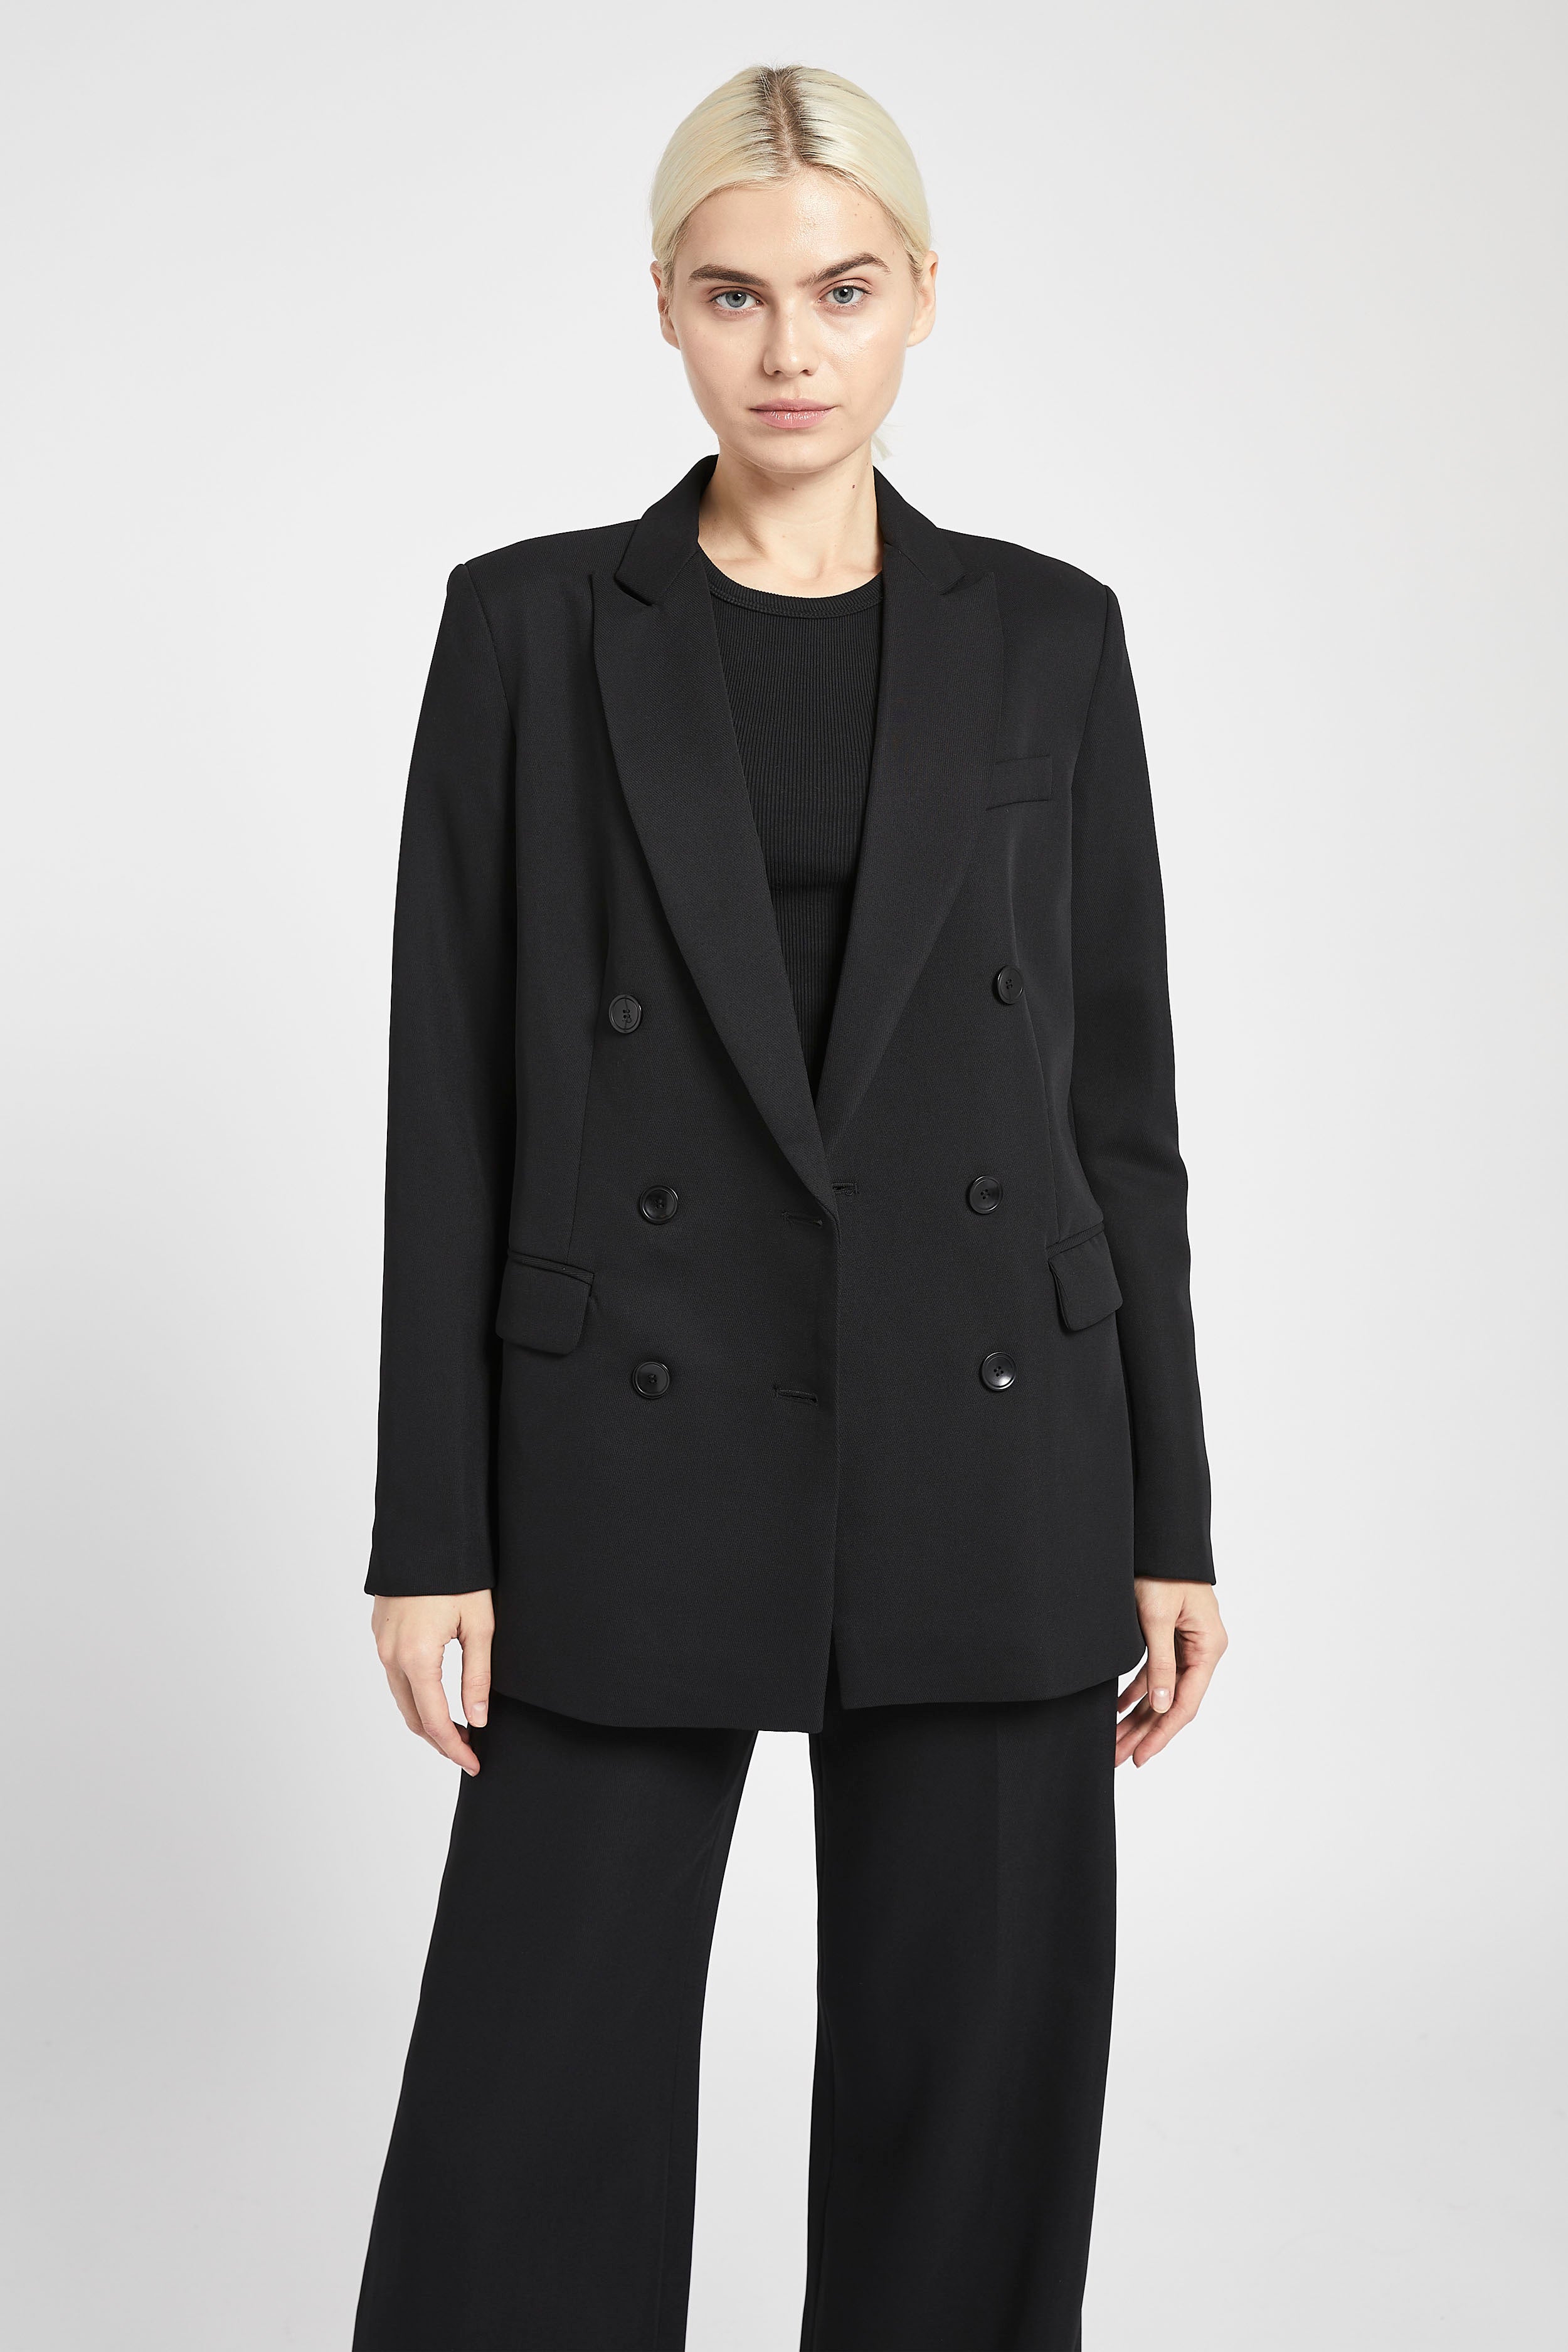 72 Best Blazers for Women to Shop—From Cropped to Oversized